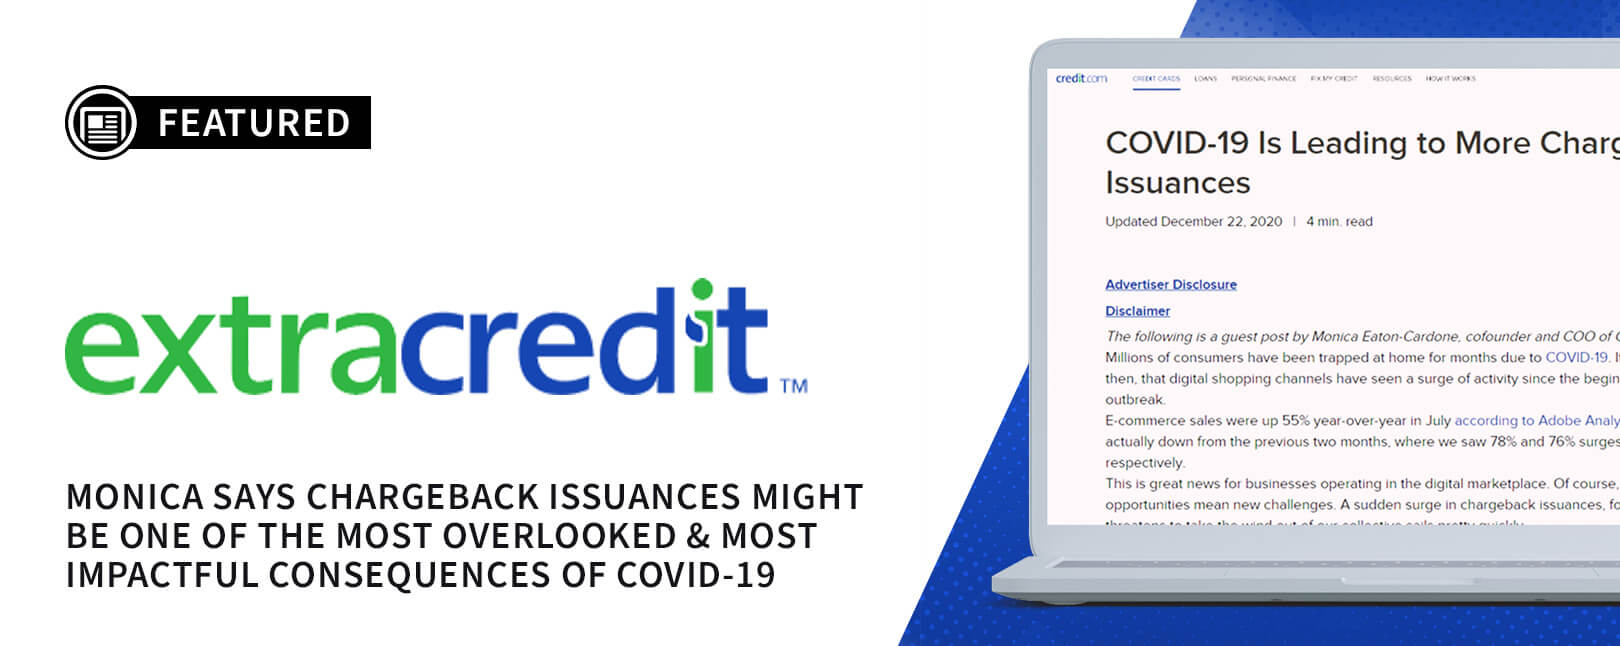 COVID-19 Is Leading to More Chargeback Issuances